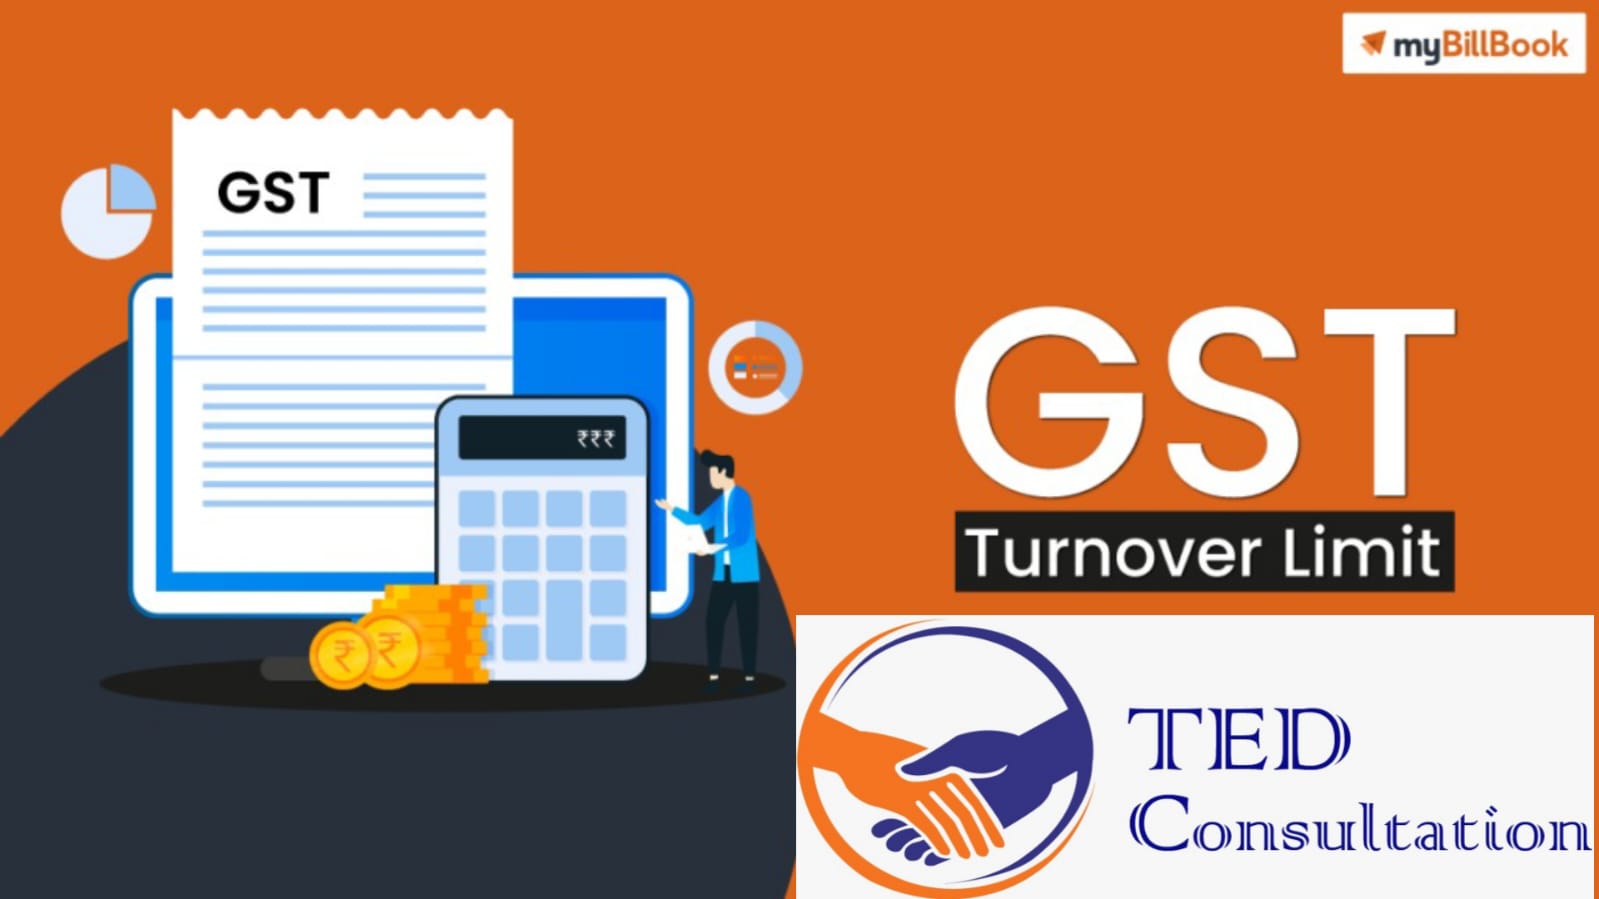 What's the GST minimum turnover? For GST